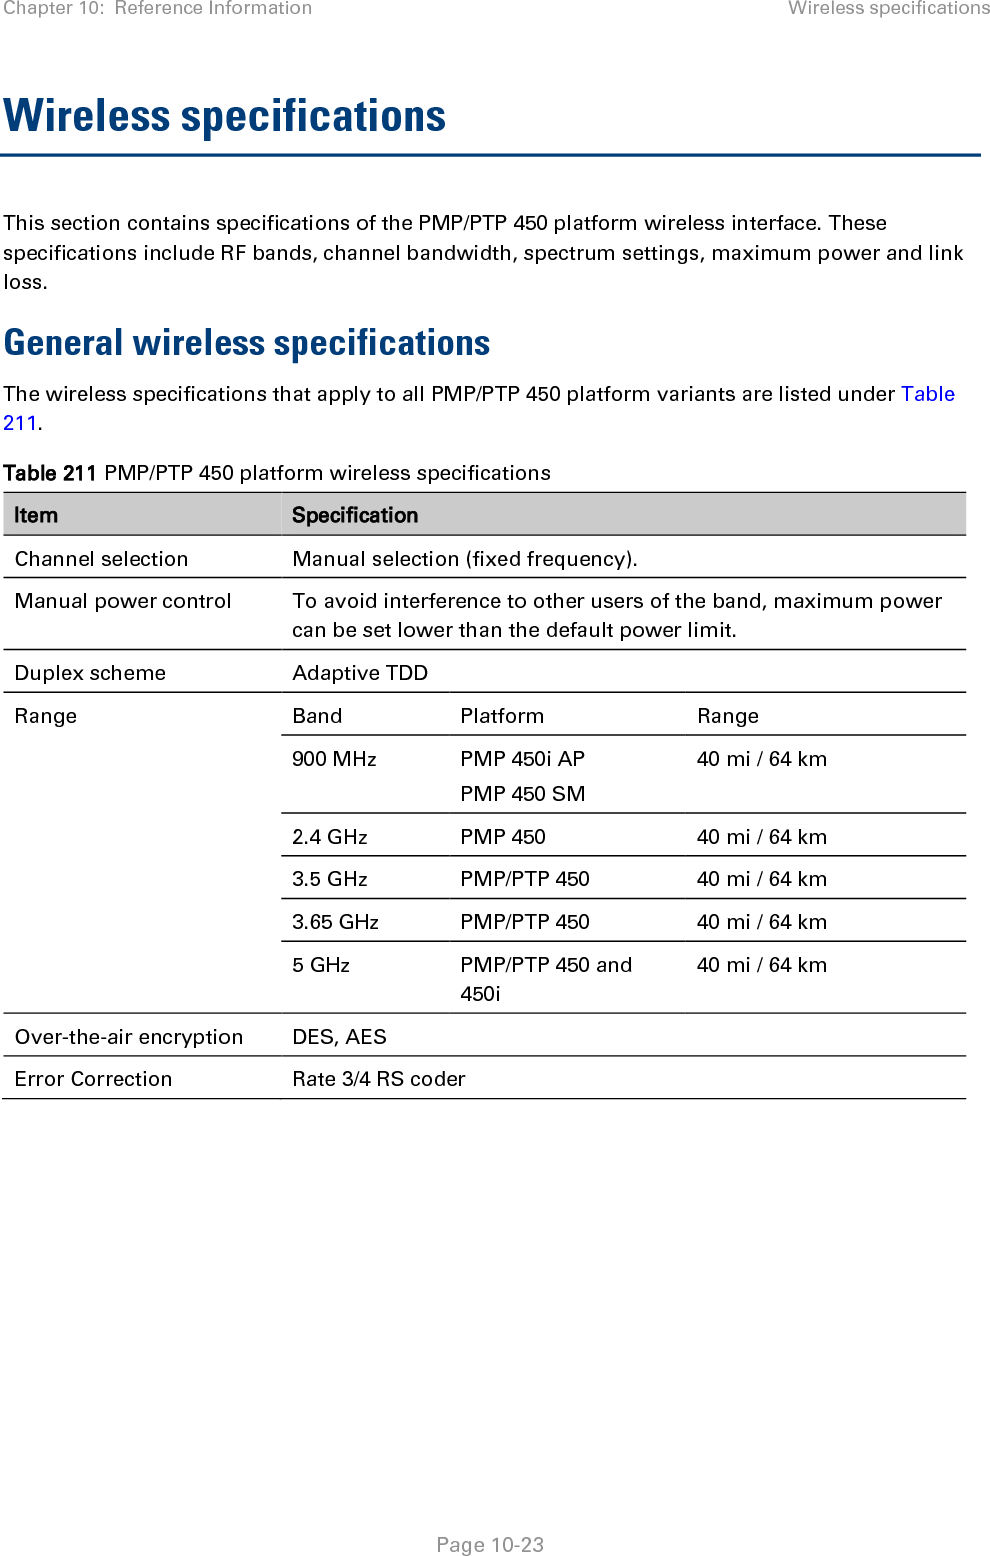 Chapter 10:  Reference Information Wireless specifications   Page 10-23 Wireless specifications This section contains specifications of the PMP/PTP 450 platform wireless interface. These specifications include RF bands, channel bandwidth, spectrum settings, maximum power and link loss. General wireless specifications The wireless specifications that apply to all PMP/PTP 450 platform variants are listed under Table 211. Table 211 PMP/PTP 450 platform wireless specifications Item Specification Channel selection Manual selection (fixed frequency). Manual power control  To avoid interference to other users of the band, maximum power can be set lower than the default power limit. Duplex scheme Adaptive TDD Range Band Platform Range 900 MHz  PMP 450i AP  PMP 450 SM 40 mi / 64 km 2.4 GHz  PMP 450 40 mi / 64 km 3.5 GHz  PMP/PTP 450 40 mi / 64 km 3.65 GHz  PMP/PTP 450 40 mi / 64 km 5 GHz  PMP/PTP 450 and 450i 40 mi / 64 km Over-the-air encryption DES, AES Error Correction Rate 3/4 RS coder    